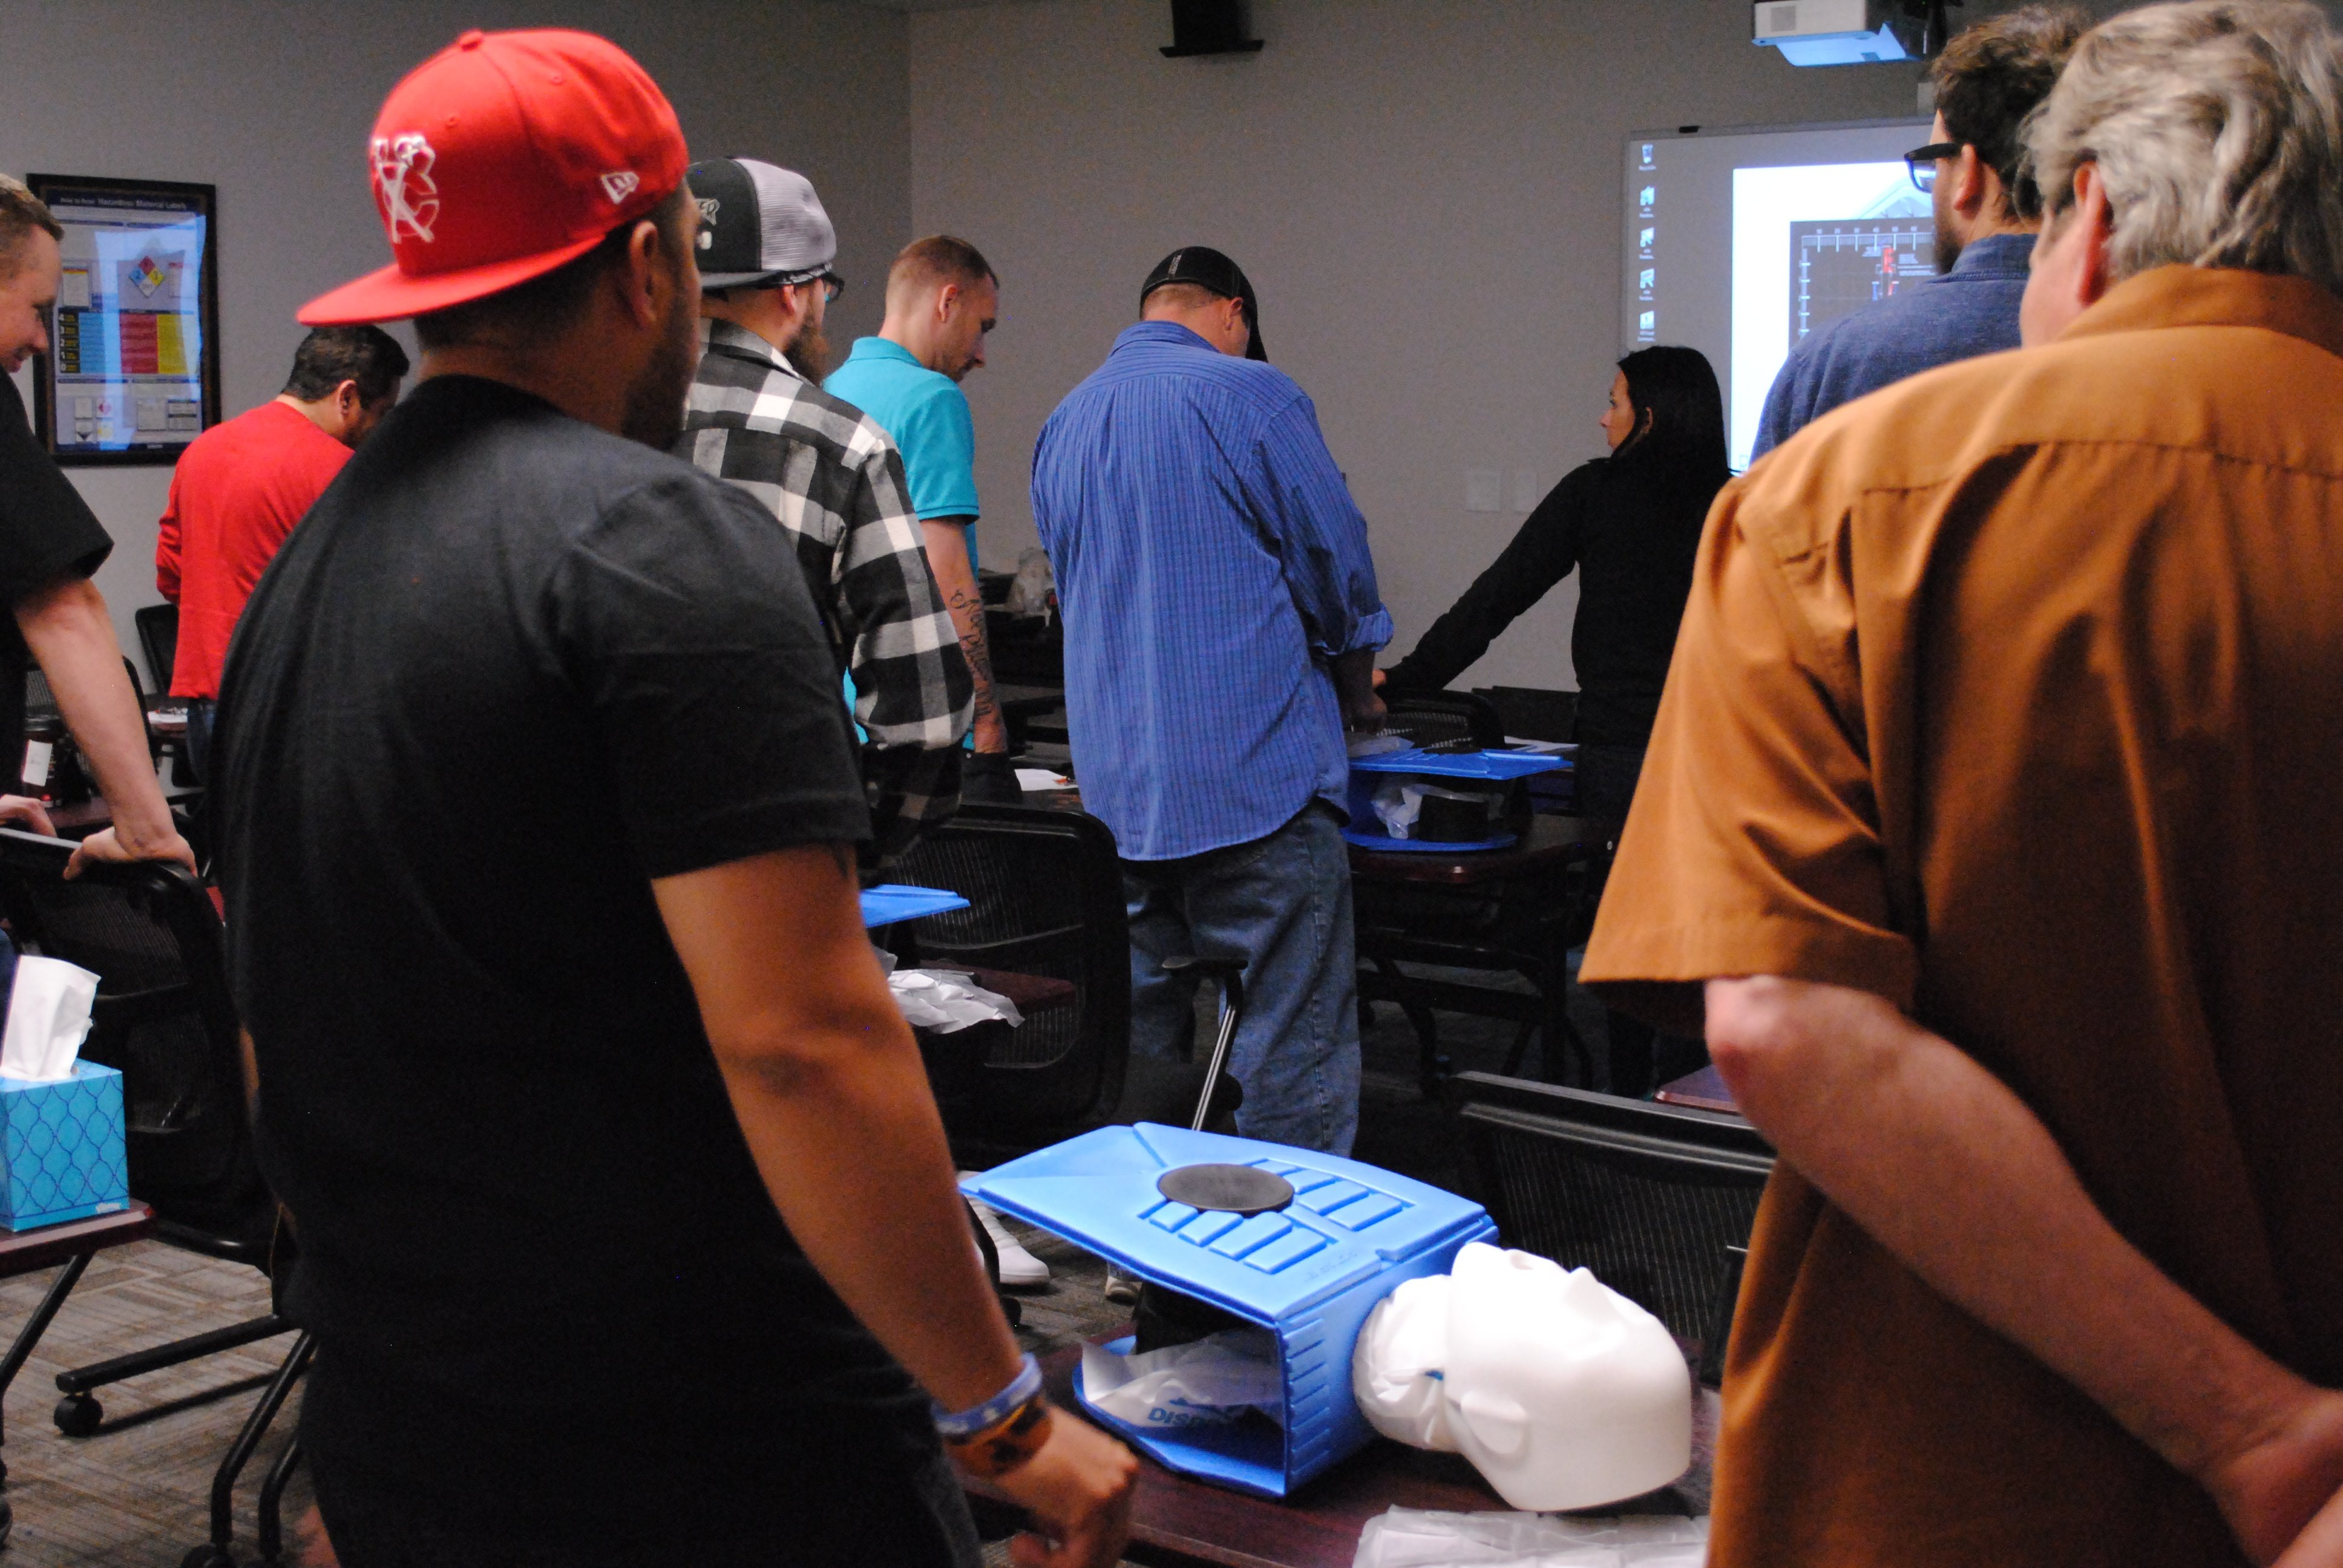 Students performing CPR during first aid training